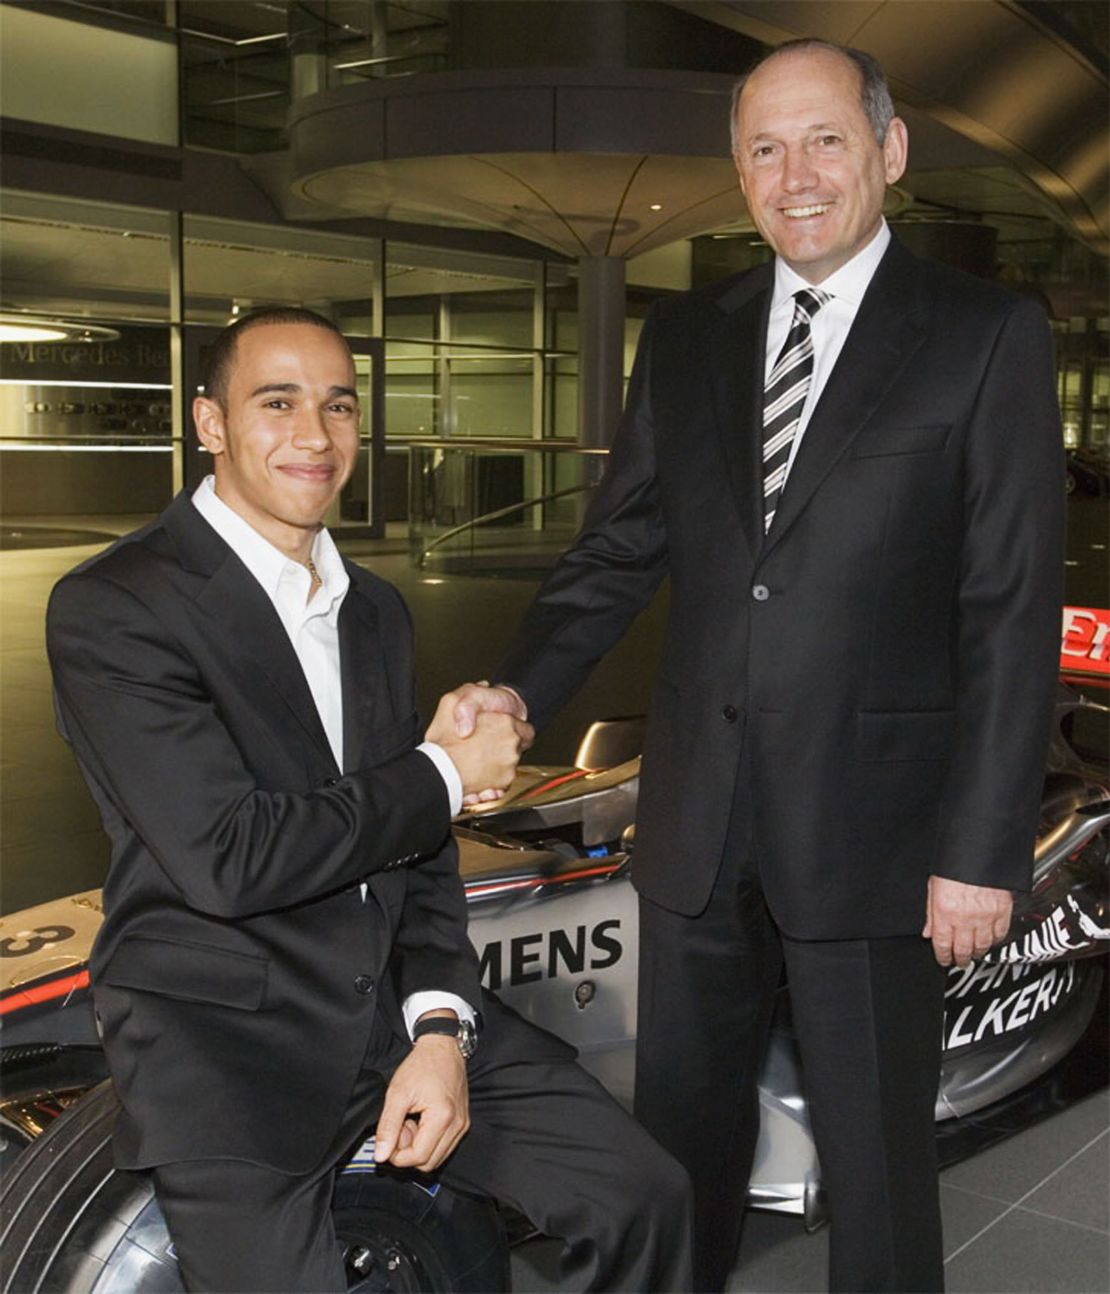 Hamilton joined McLaren's Young Driver Development programme in 1998 and signed for the F1 team in 2007. Here he is pictured with former McLaren boss Ron Dennis. 